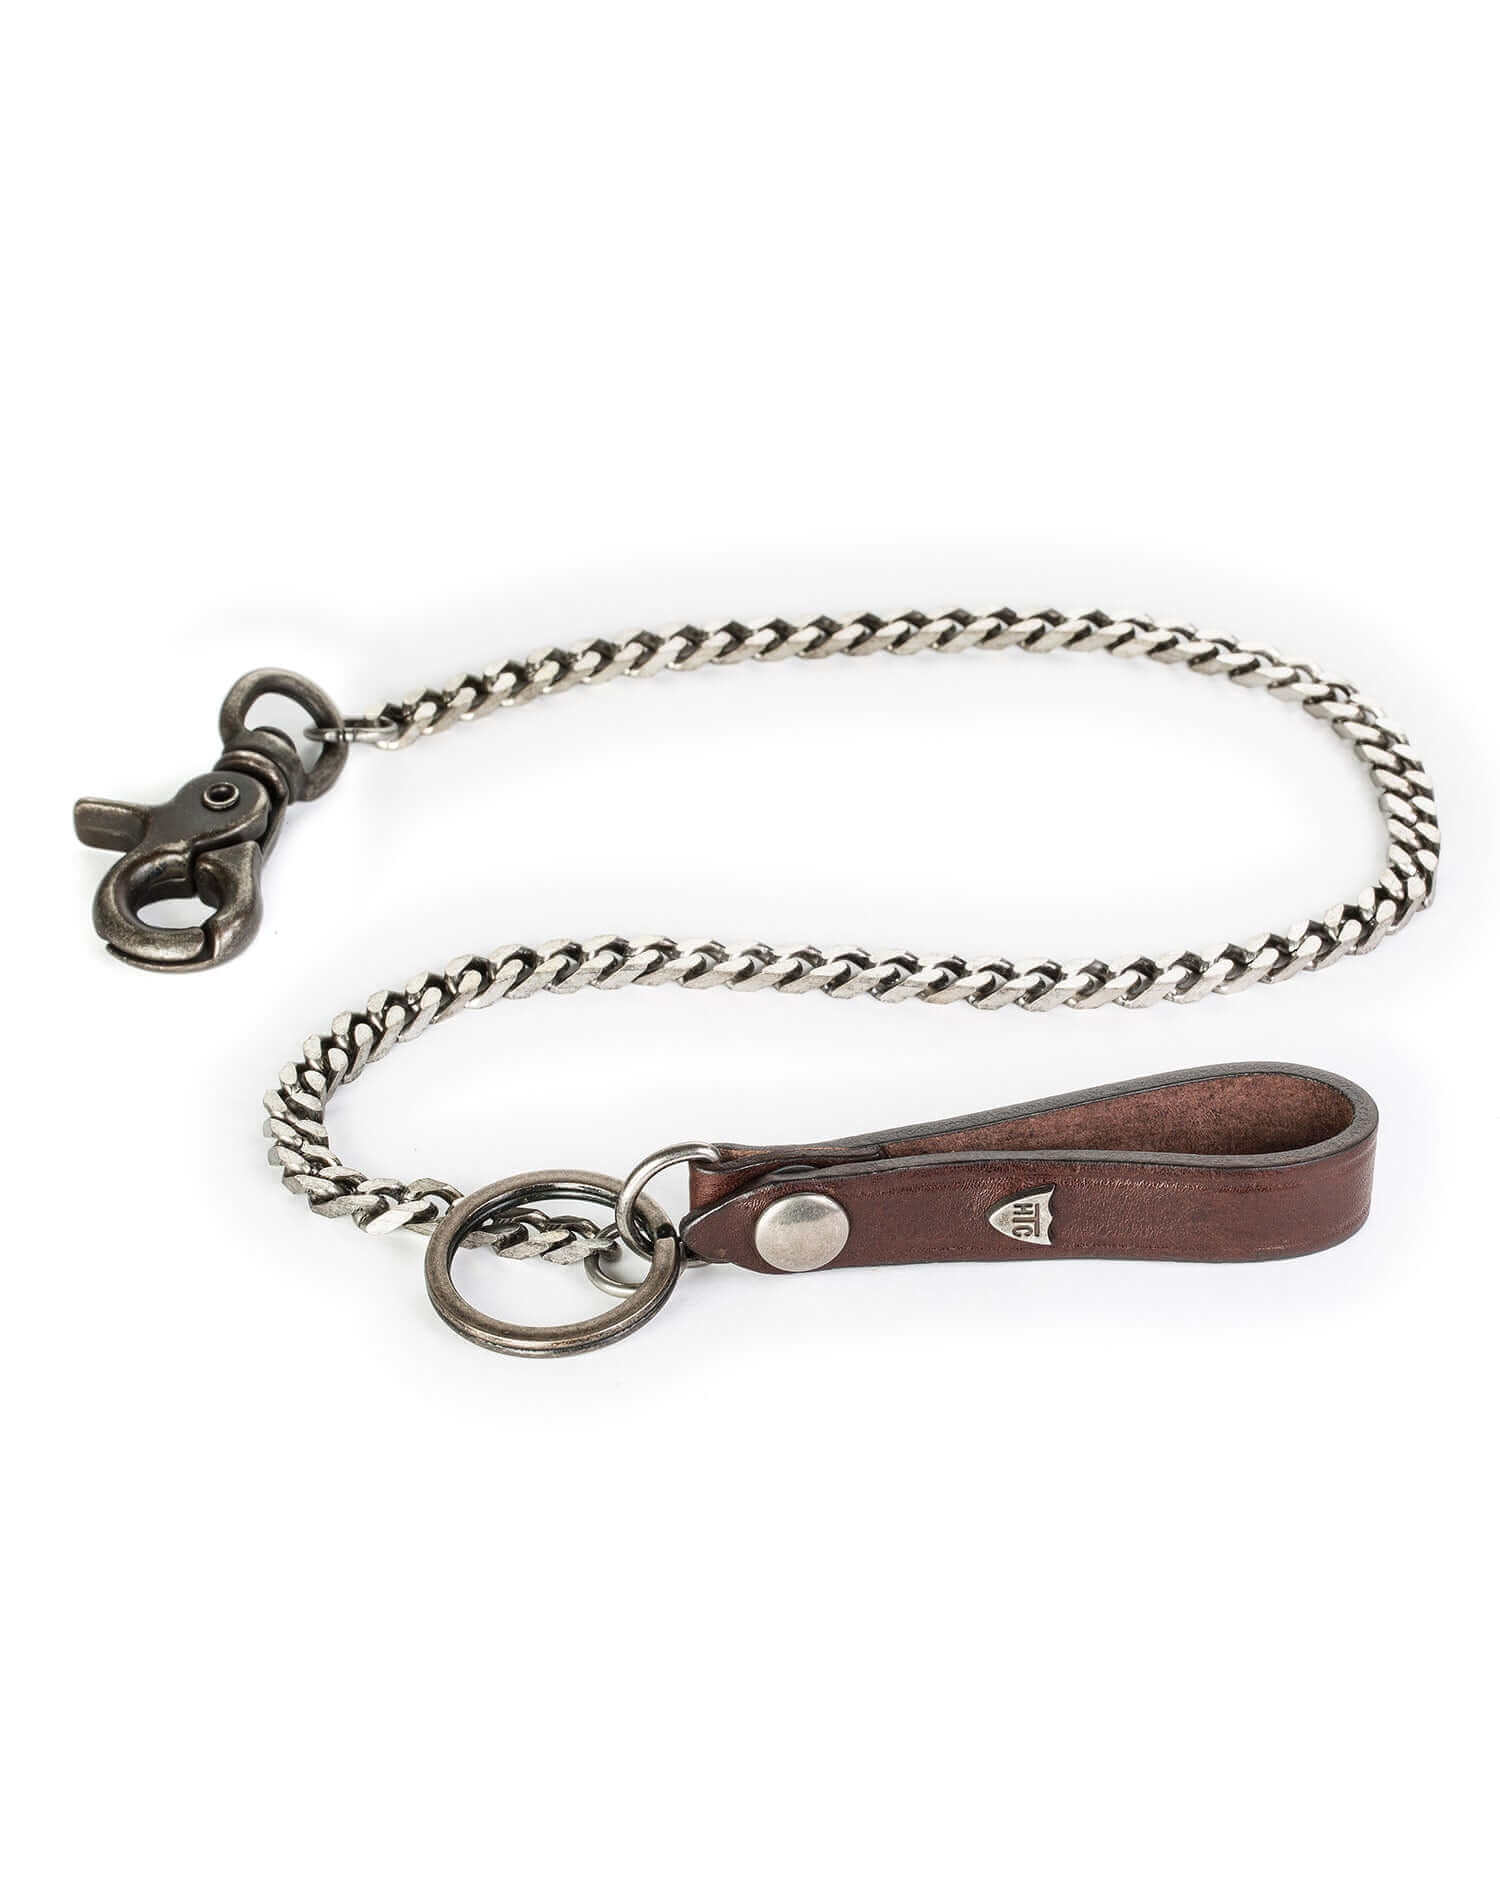 BASIC KEYRING Chain keyring with brown leather detail. Made in Italy HTC LOS ANGELES